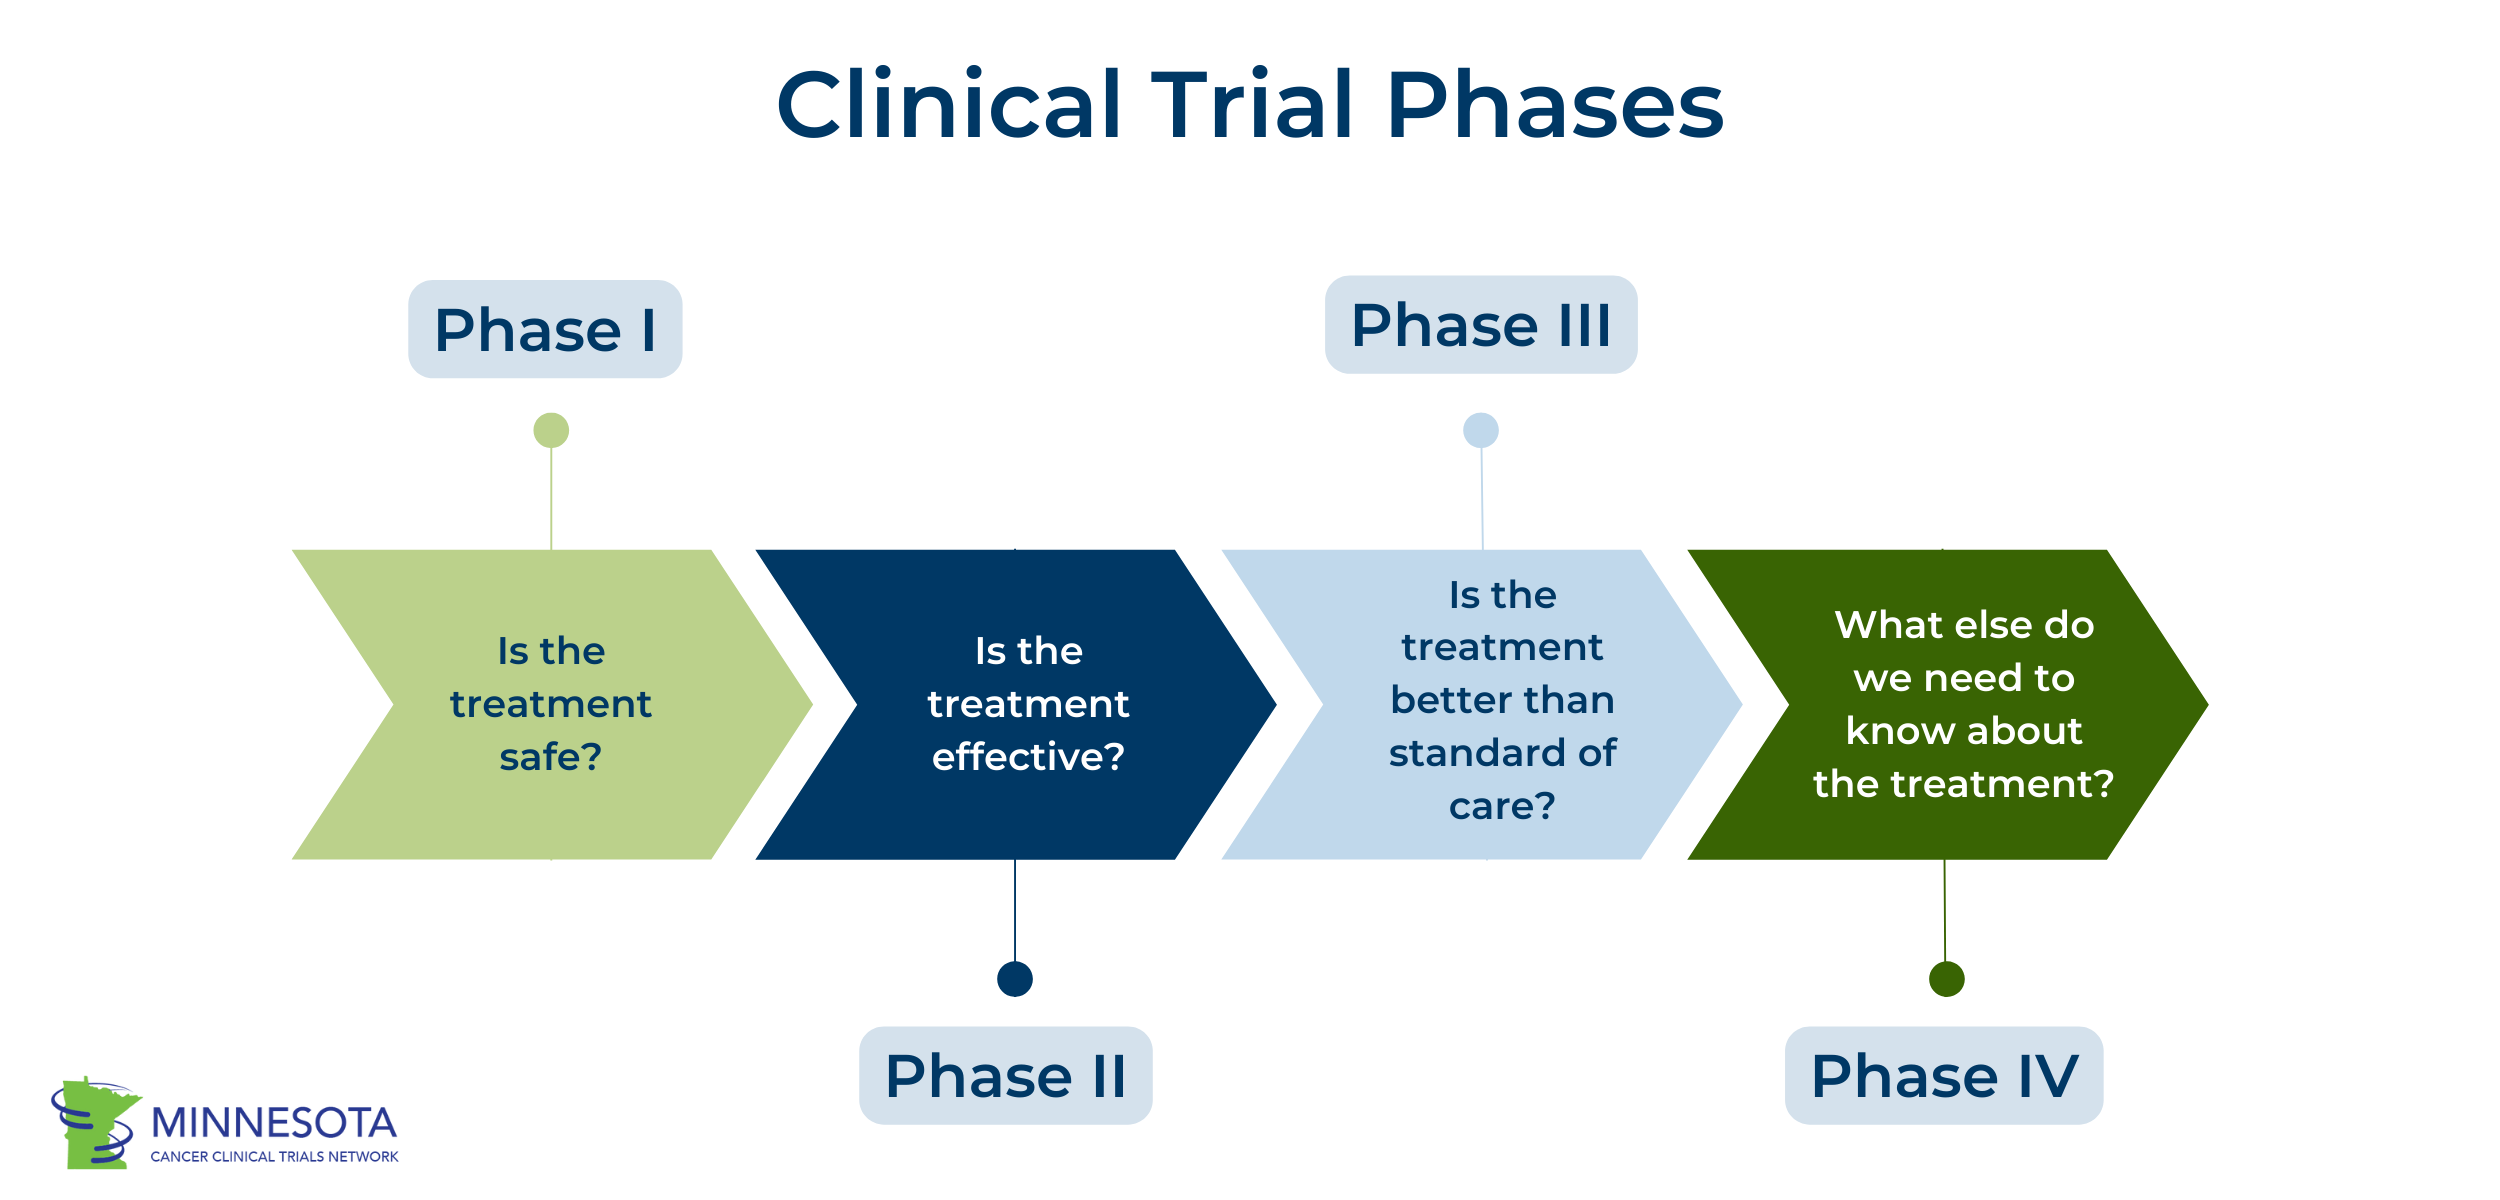 infographic showing progression of clinical trial phases from phase I to phase IV